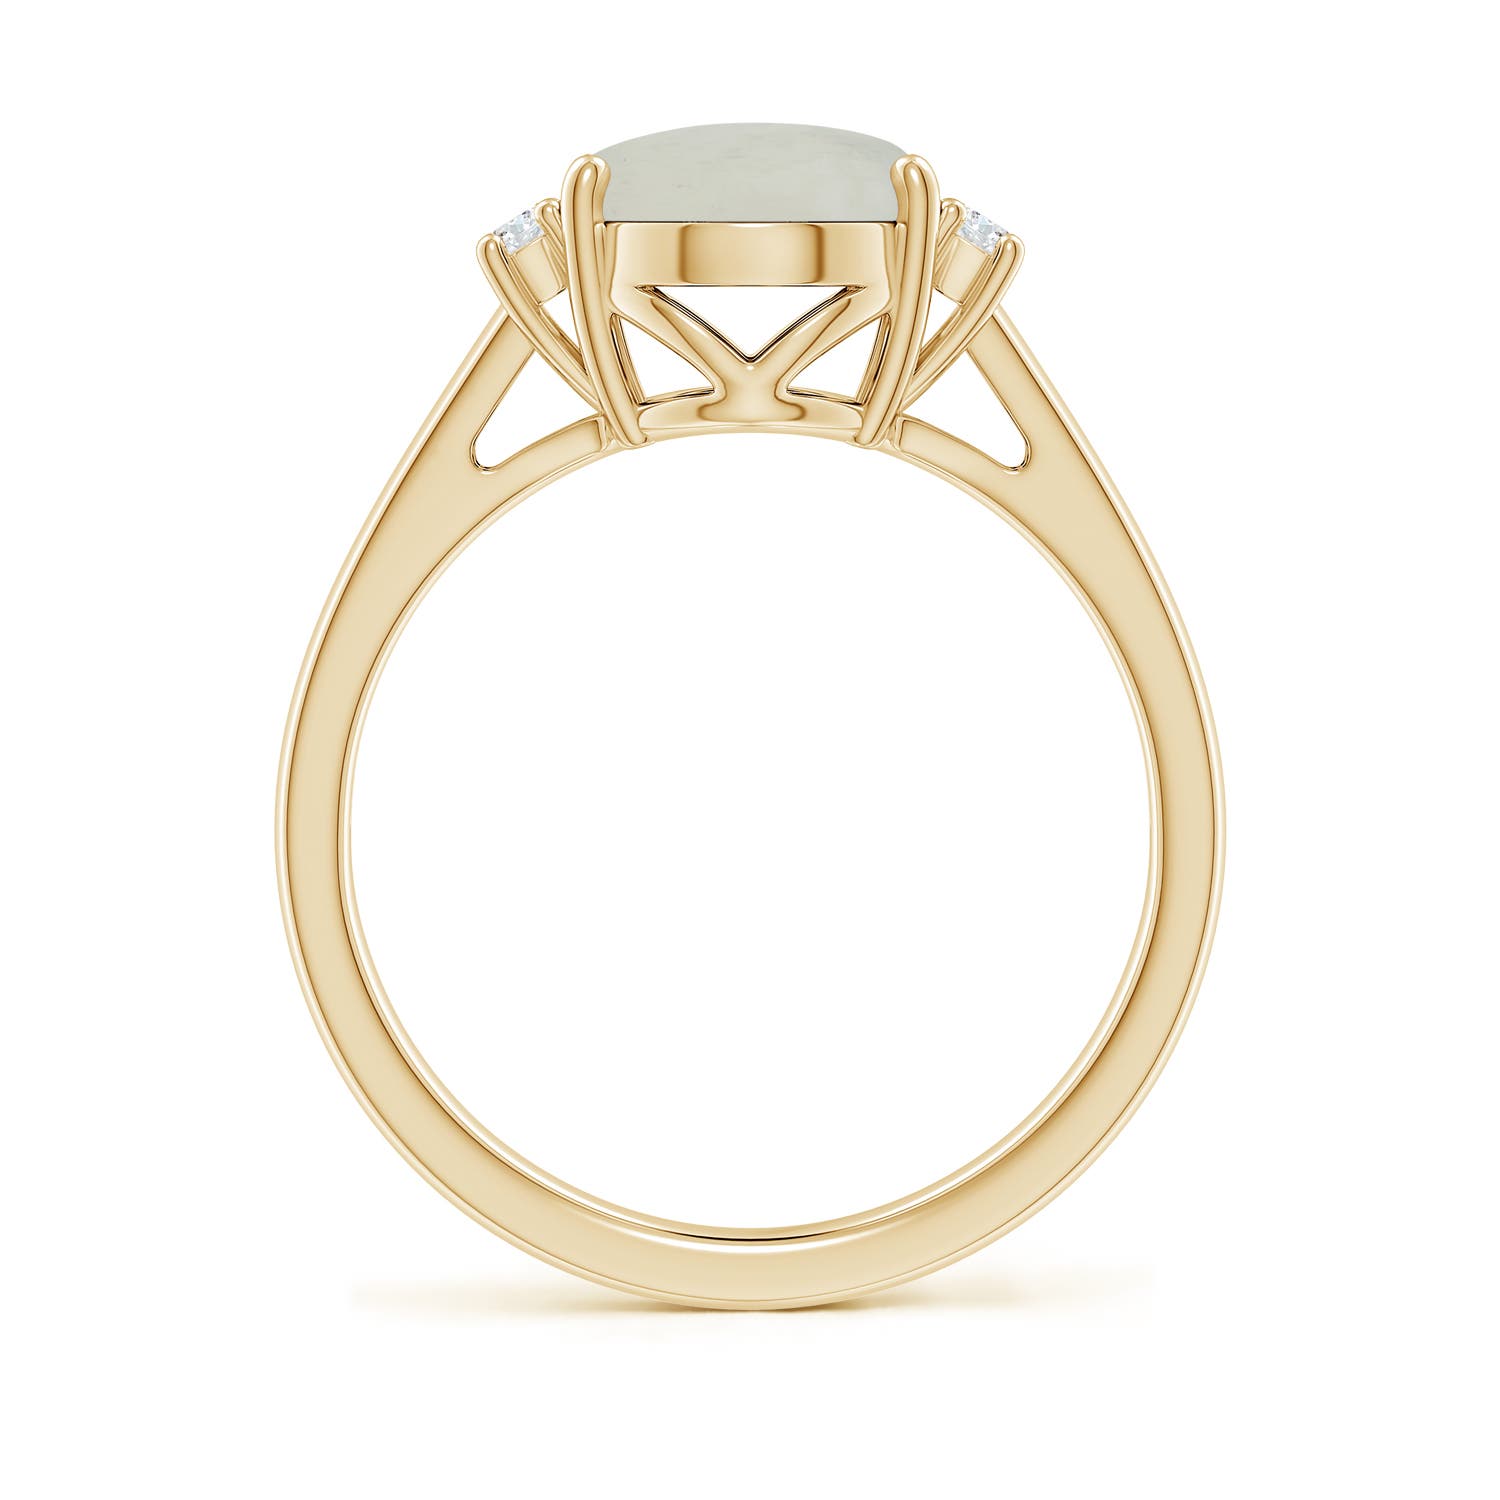 A - Moonstone / 2.66 CT / 14 KT Yellow Gold